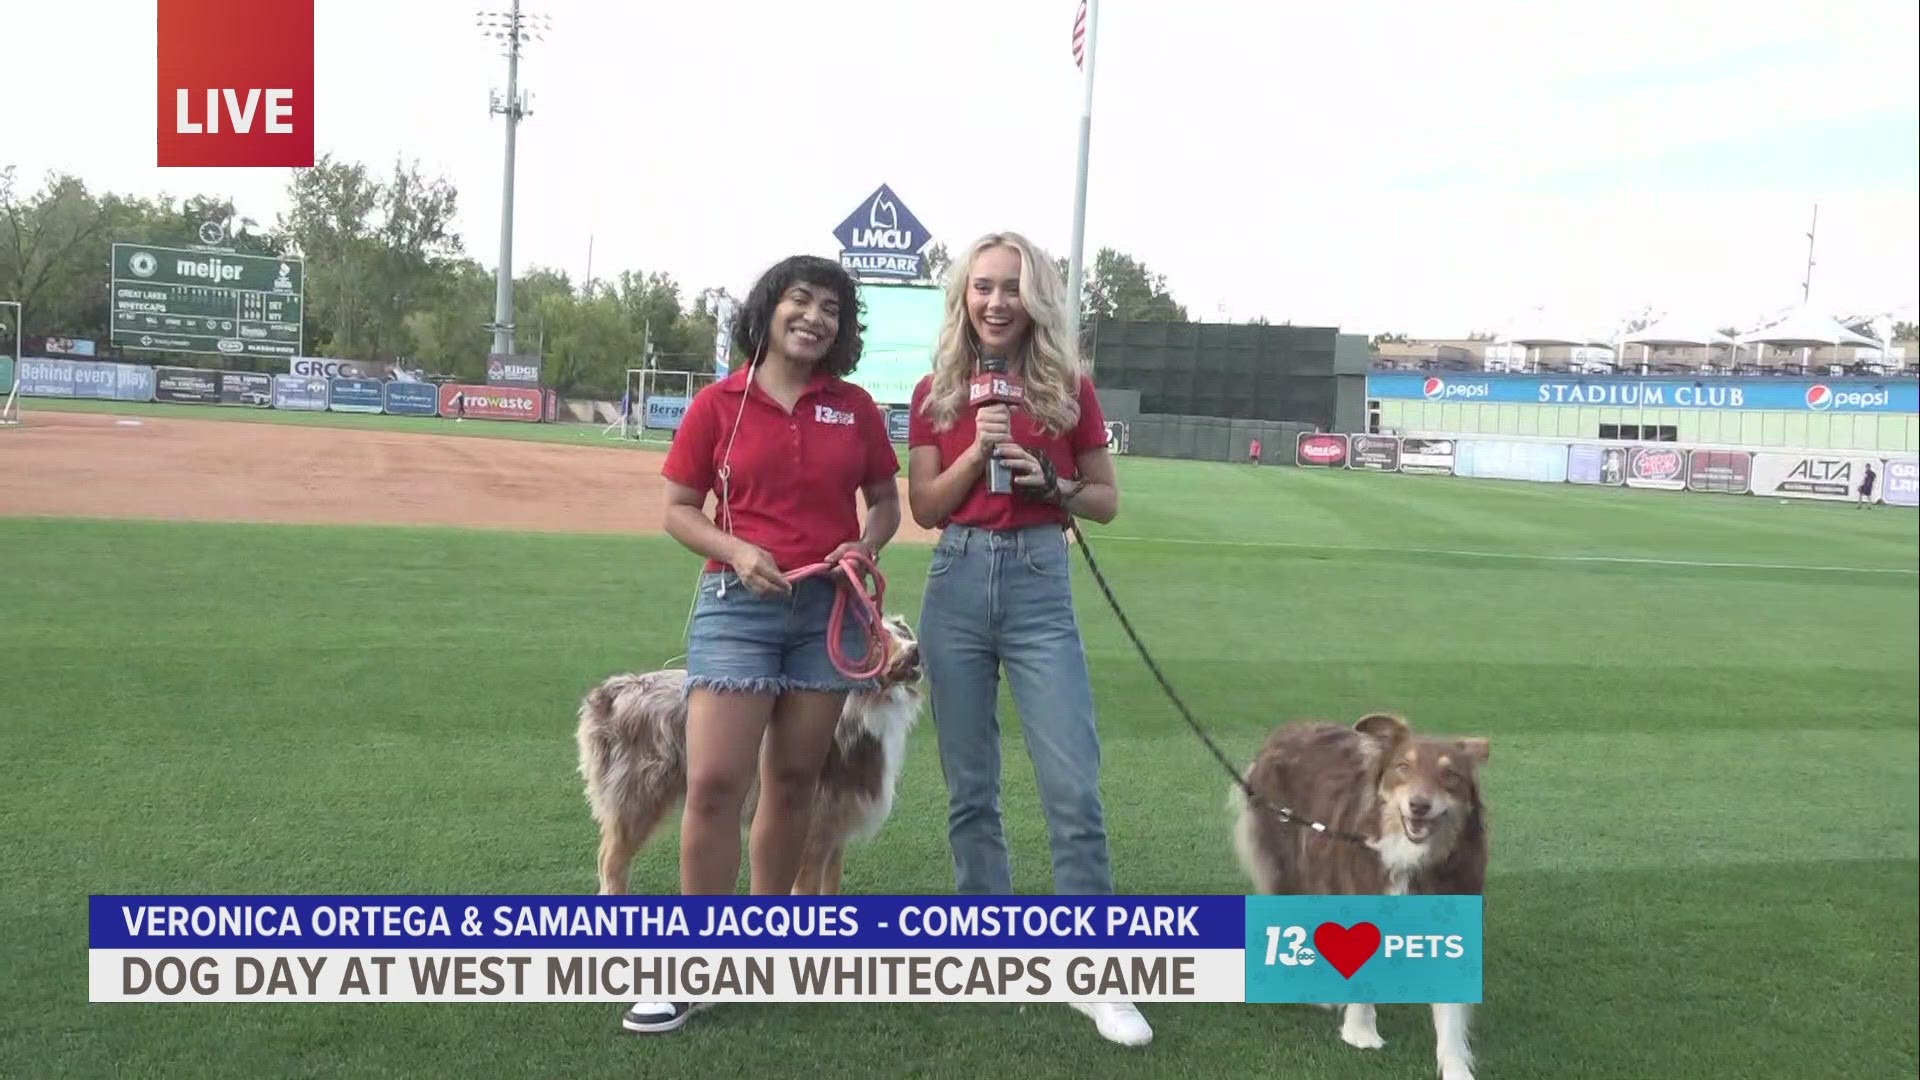 13 ON YOUR SIDE's Samantha Jacques and Veronica Ortega are live at LMCU Ballpark for Dog Day with the West Michigan Whitecaps.